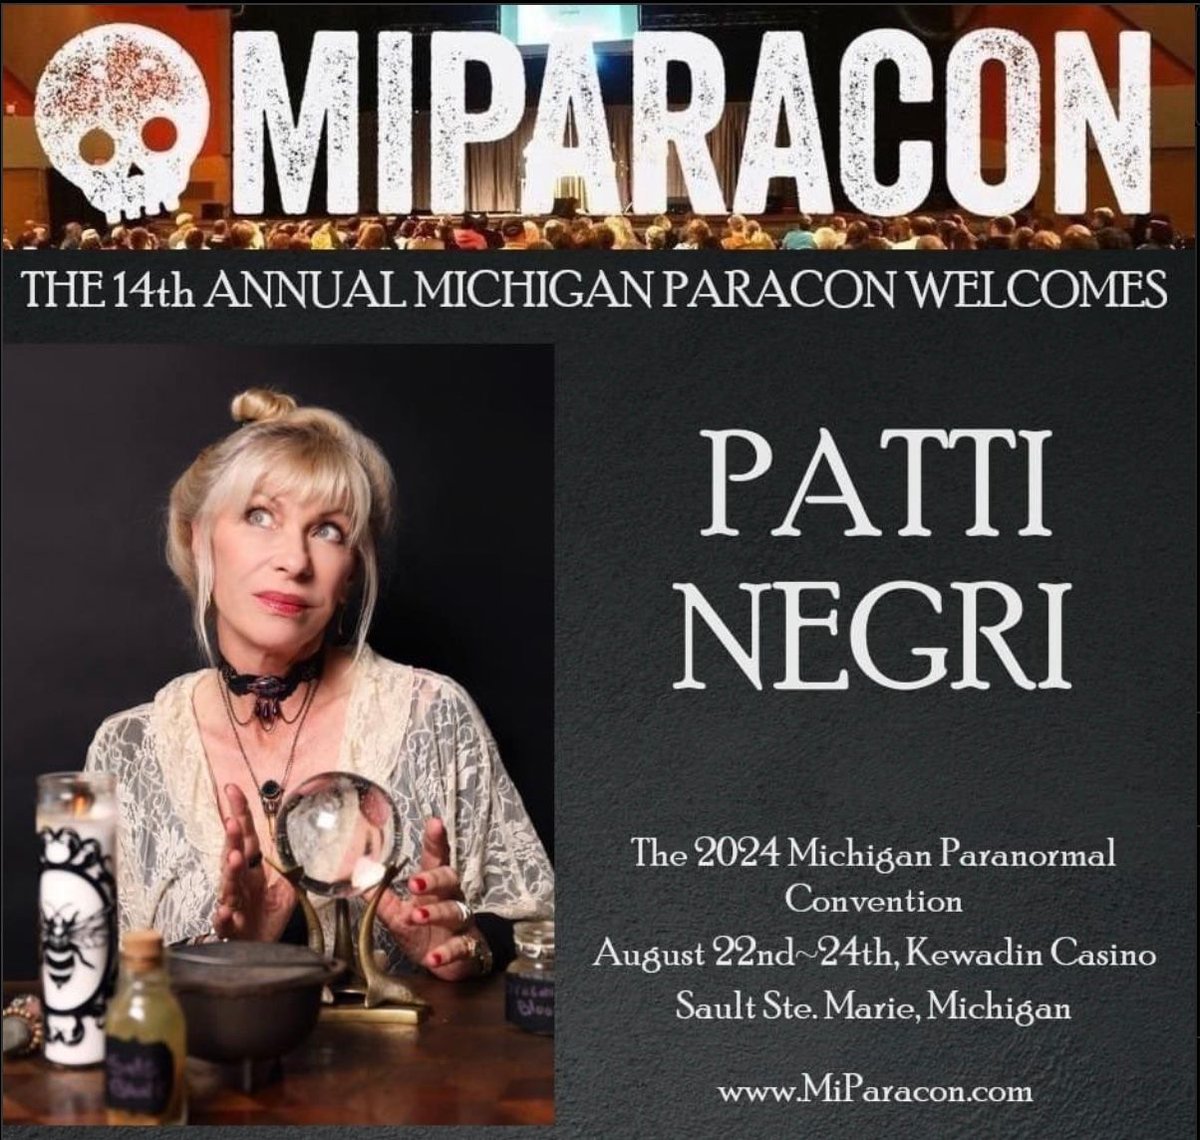 Come see me at the 14th annual Michigan Paracon! I will be offering a 90 minute workshop where I will perform a reading on the psychic gallery inside the DreamMakers Theater Friday August 23, 2024 from noon to 1:30. buff.ly/3PJdsb9